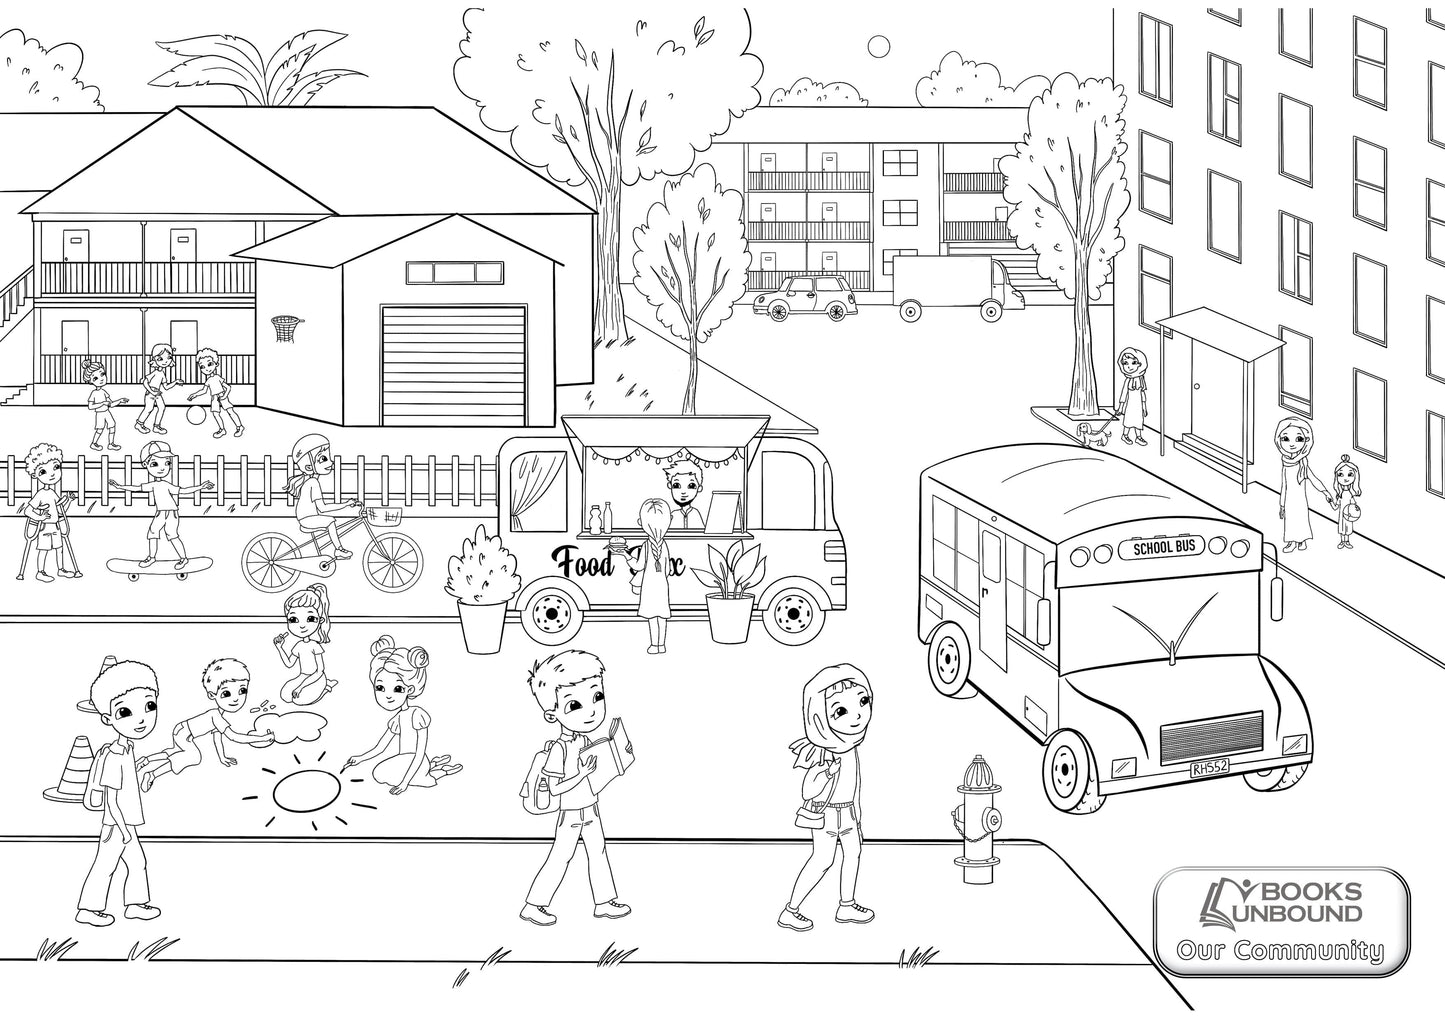 Coloring Page: Our Community